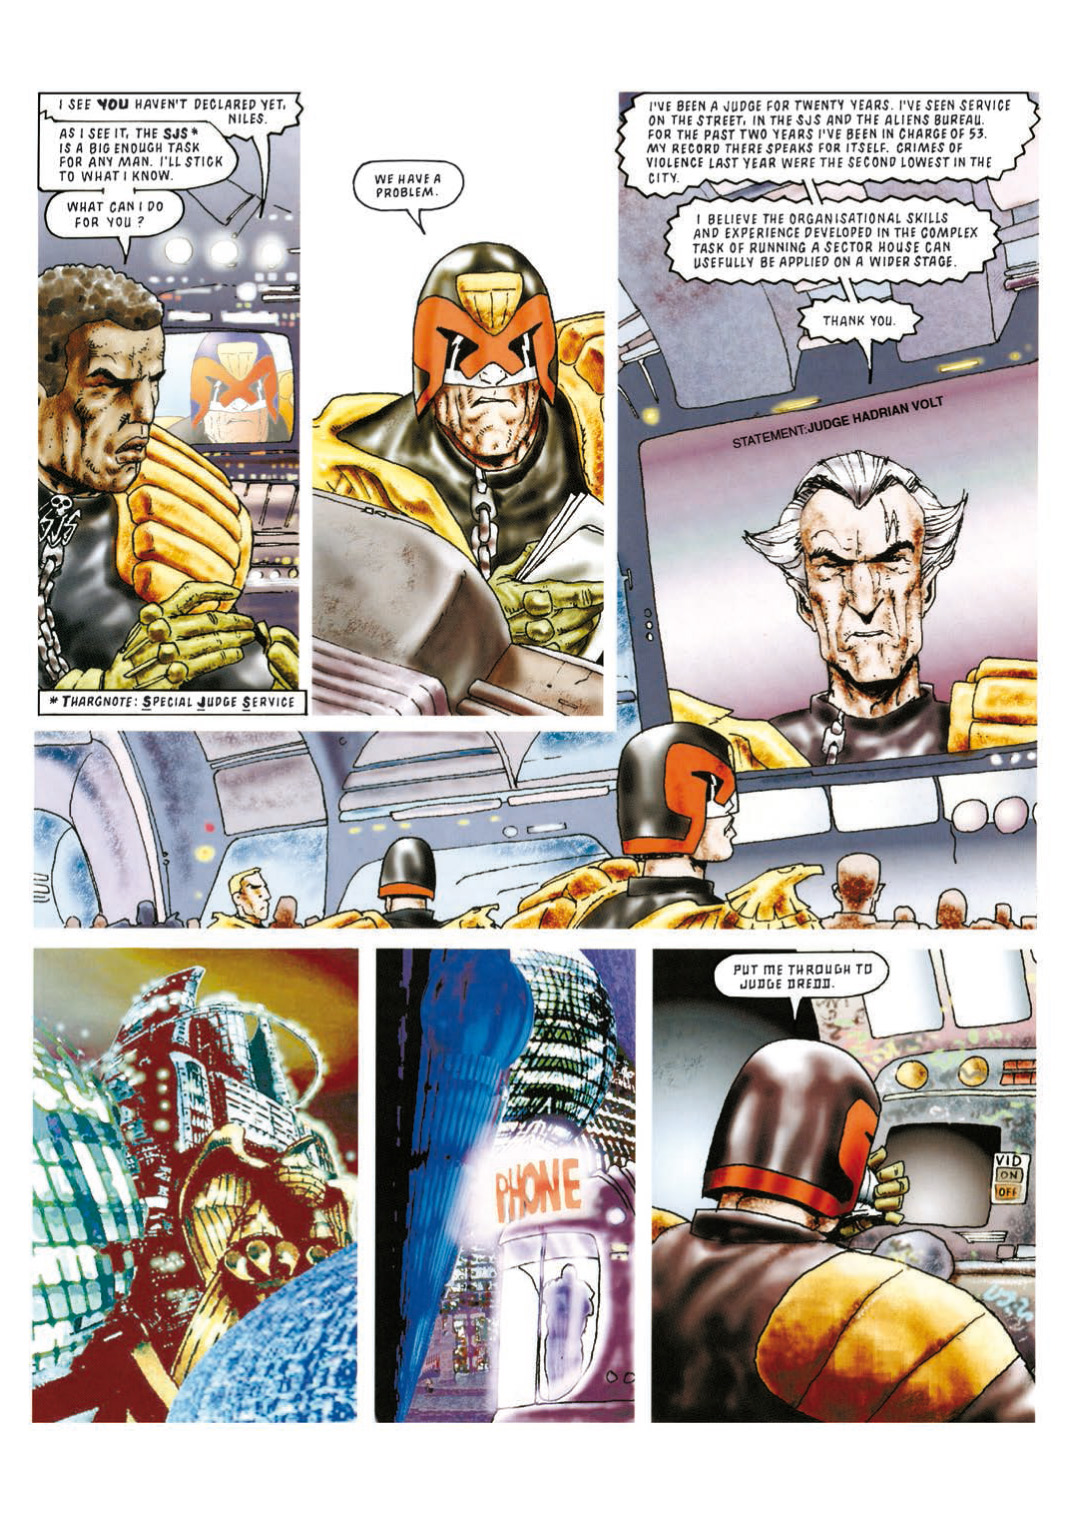 Read online Judge Dredd: The Complete Case Files comic -  Issue # TPB 22 - 15